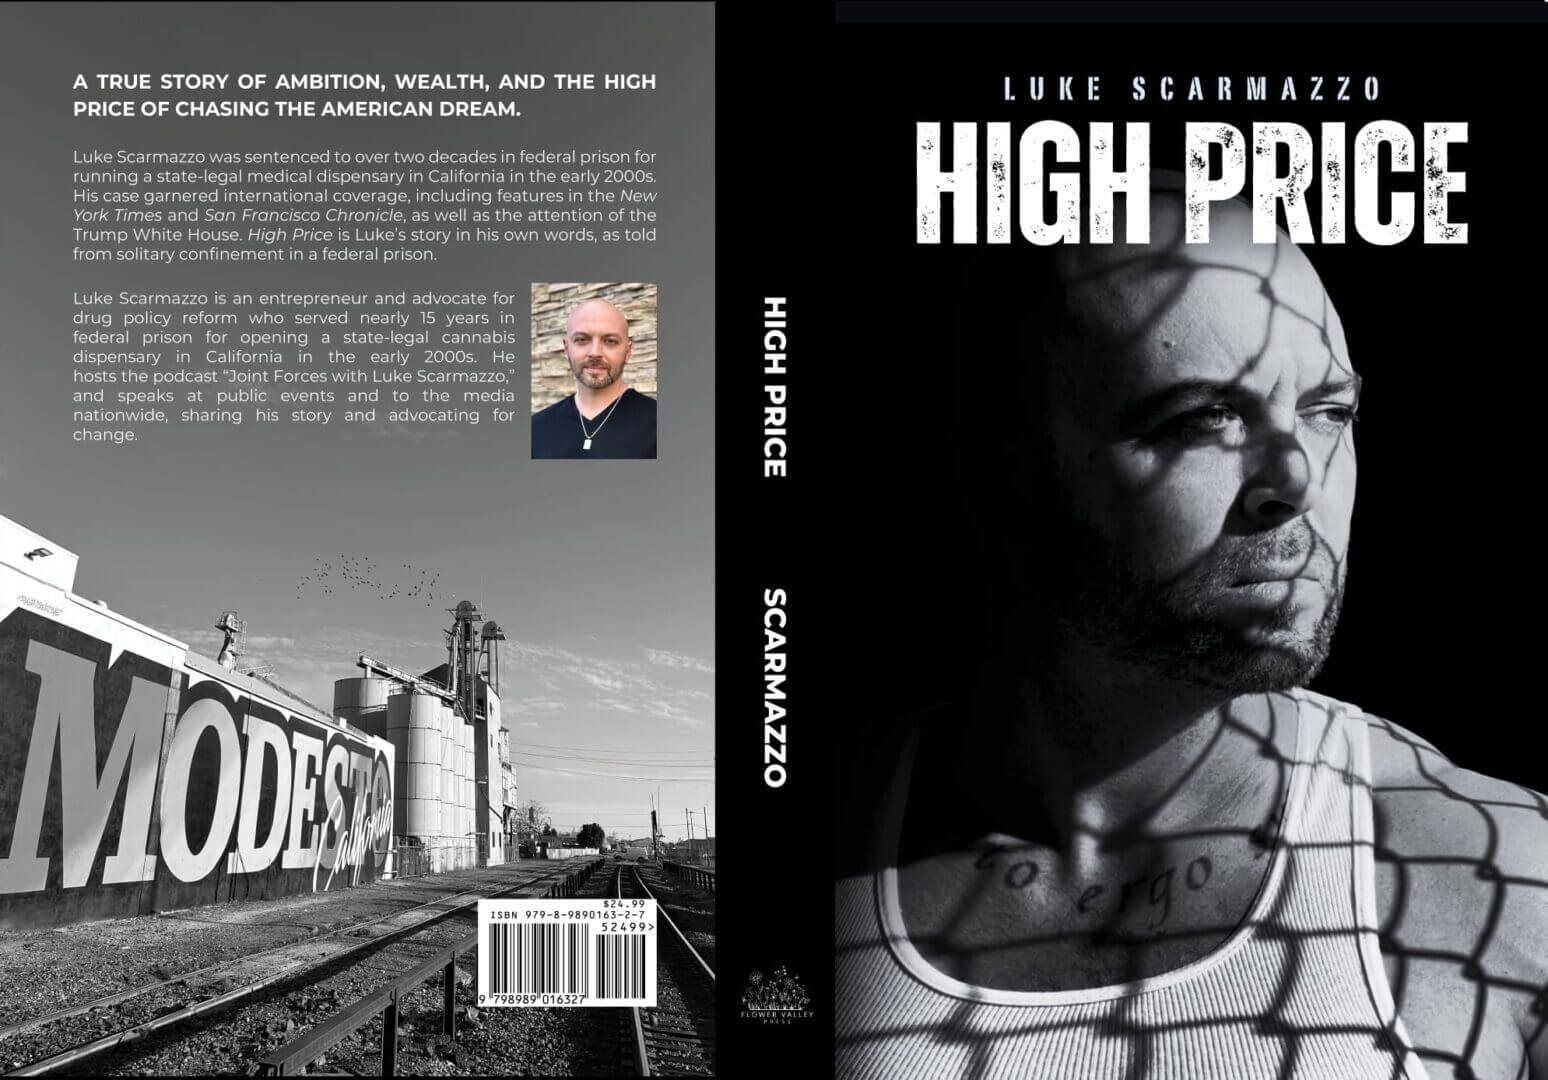 Introducing "High Price: The Luke Scarmazzo Story" - Now Available!